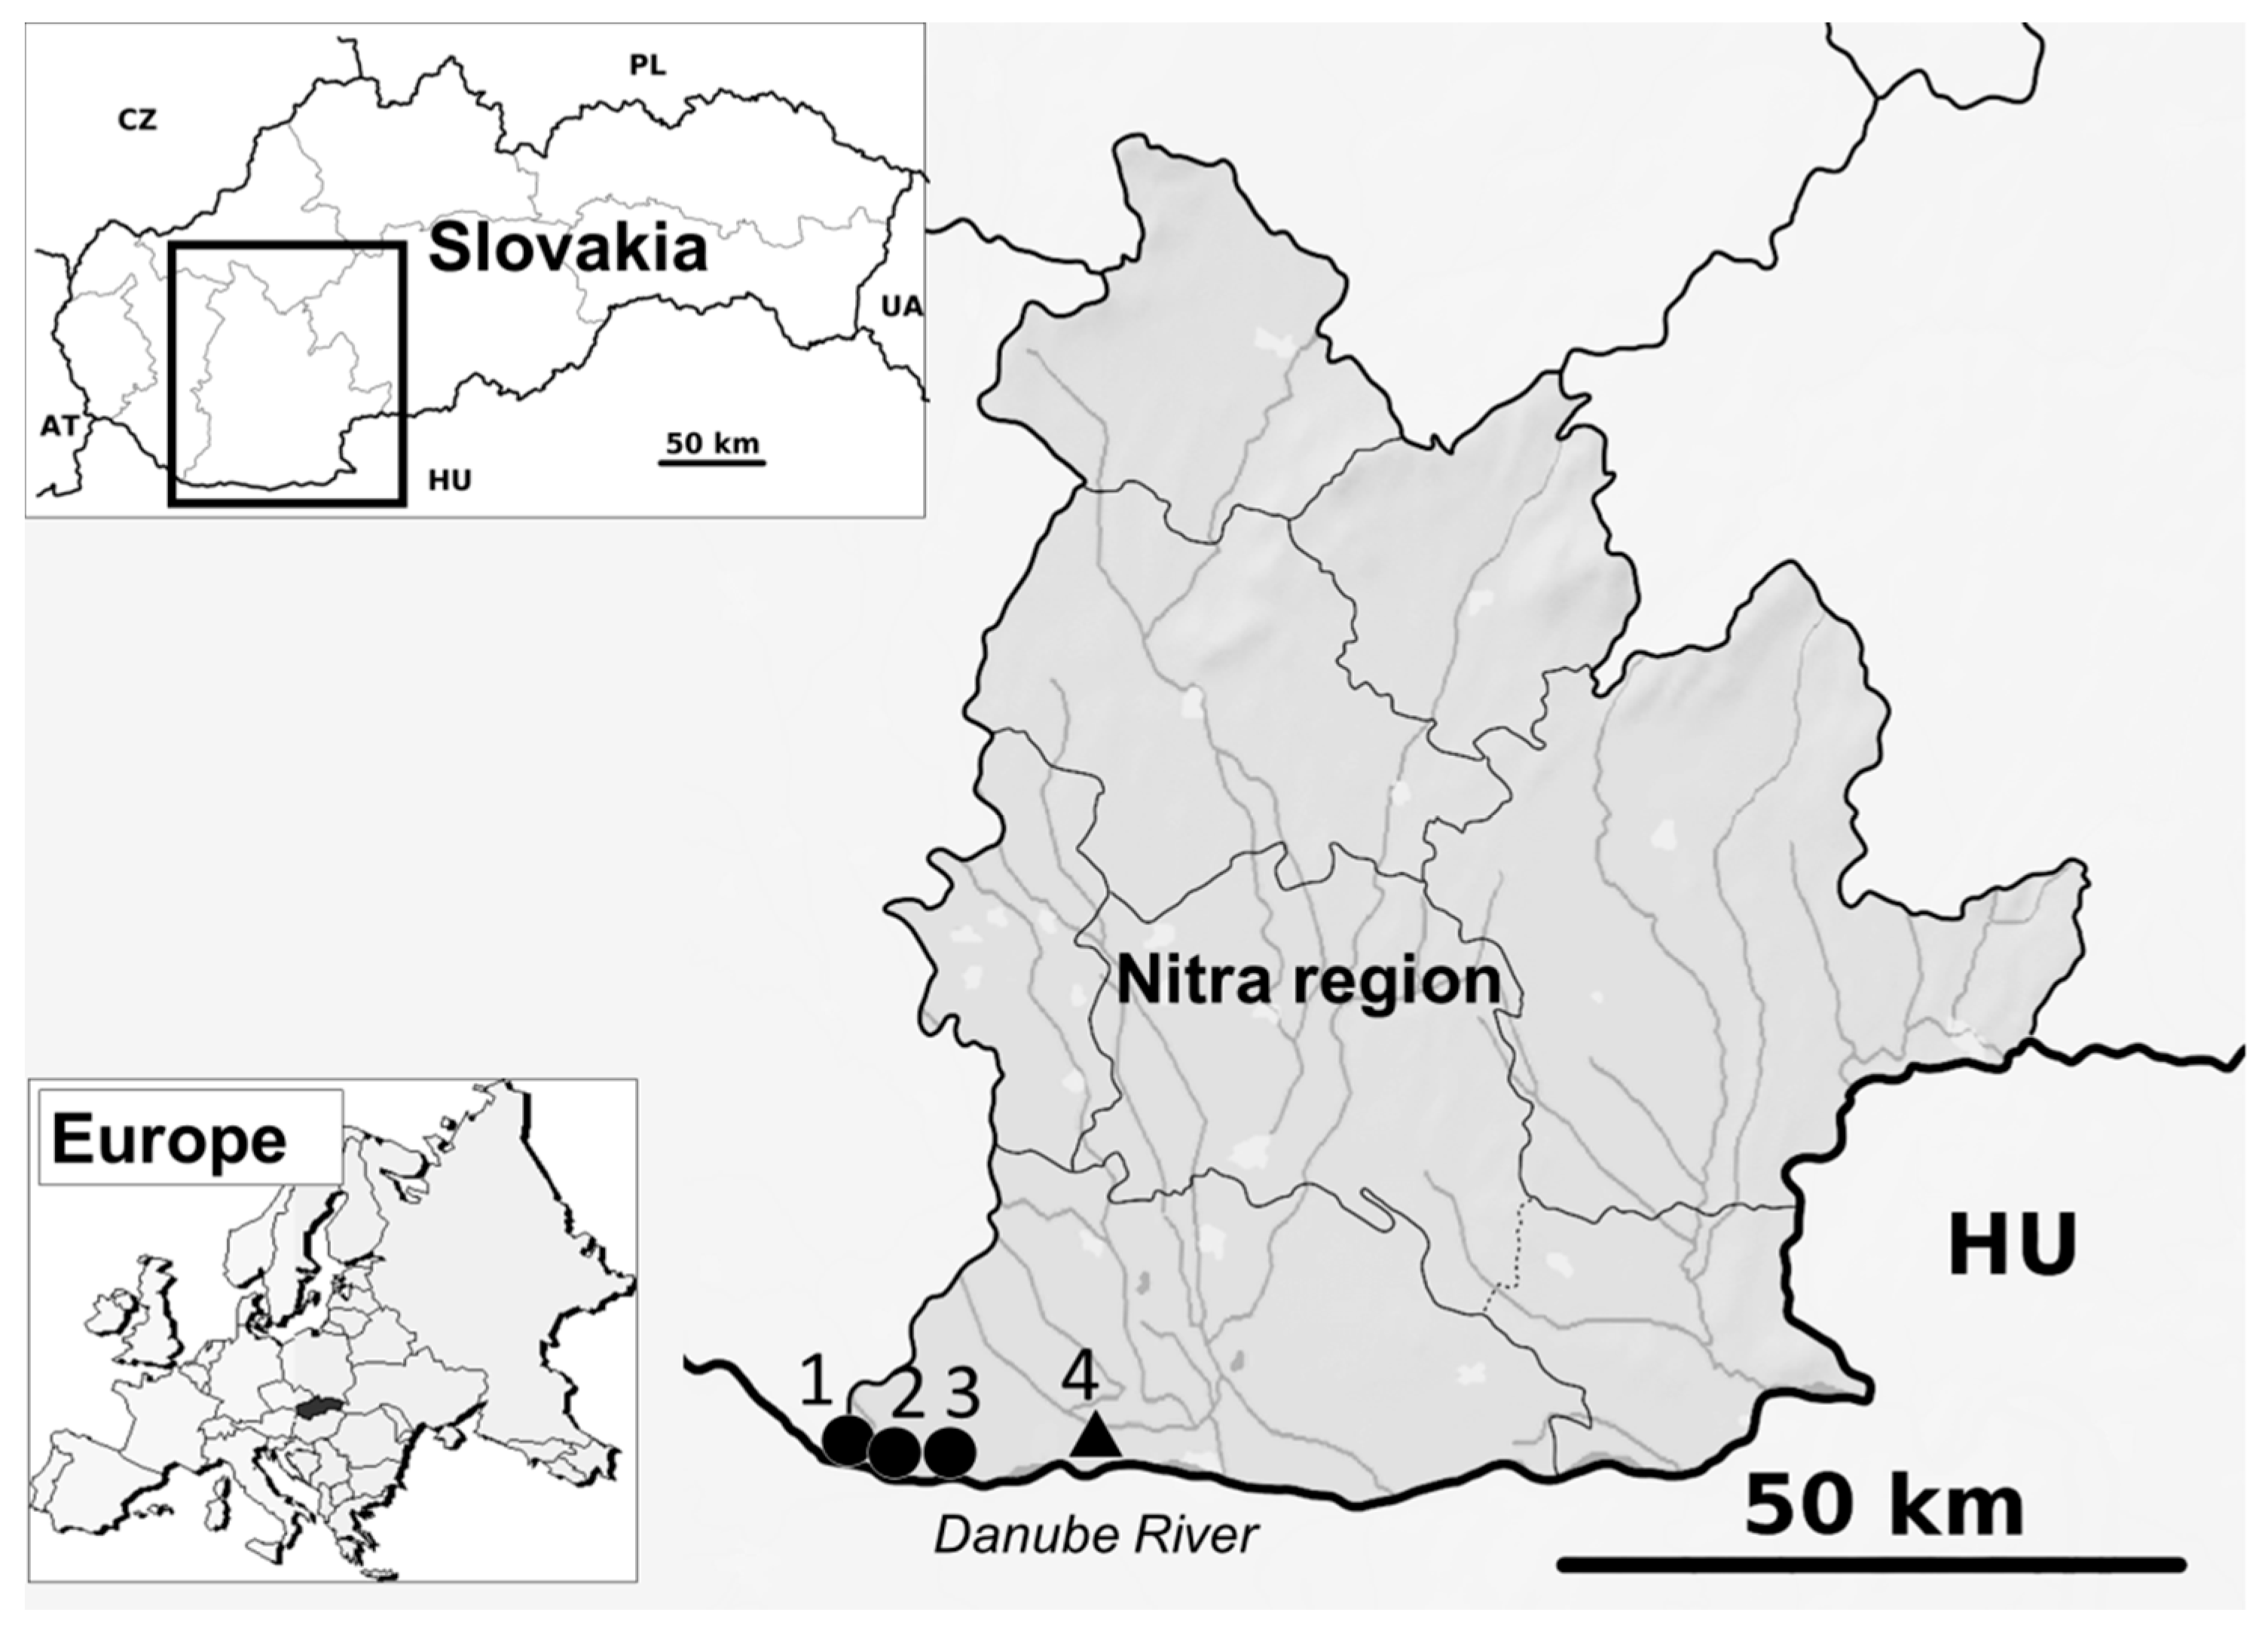 Viruses | Free Full-Text | Co-Circulation of West Nile and Usutu  Flaviviruses in Mosquitoes in Slovakia, 2018